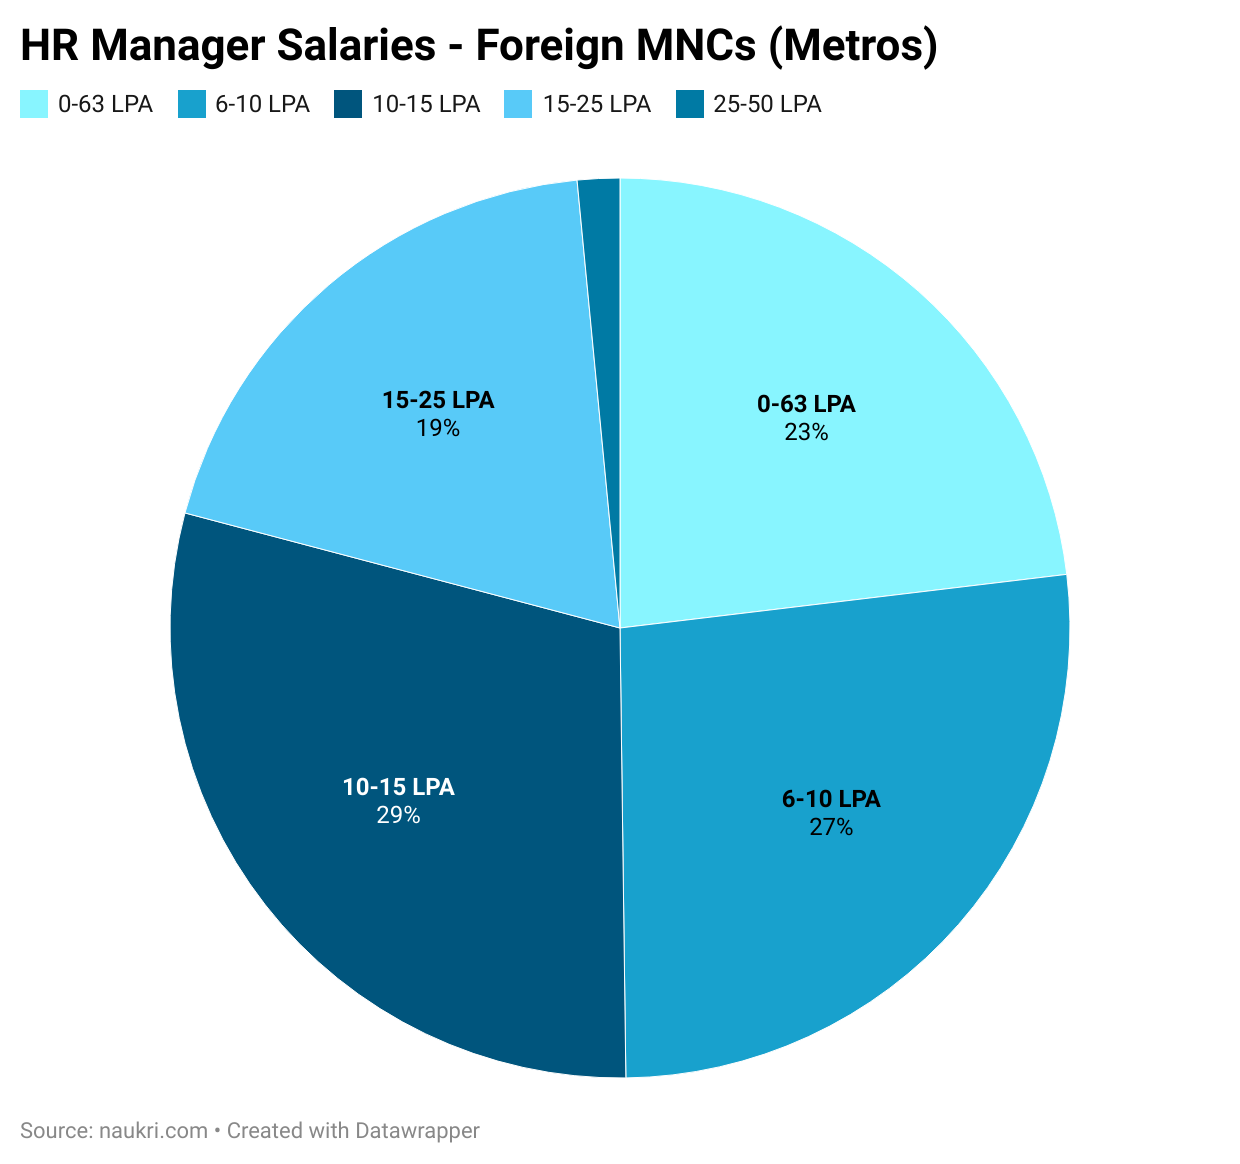 HR Manager Salaries - Foreign MNCs (Metros)